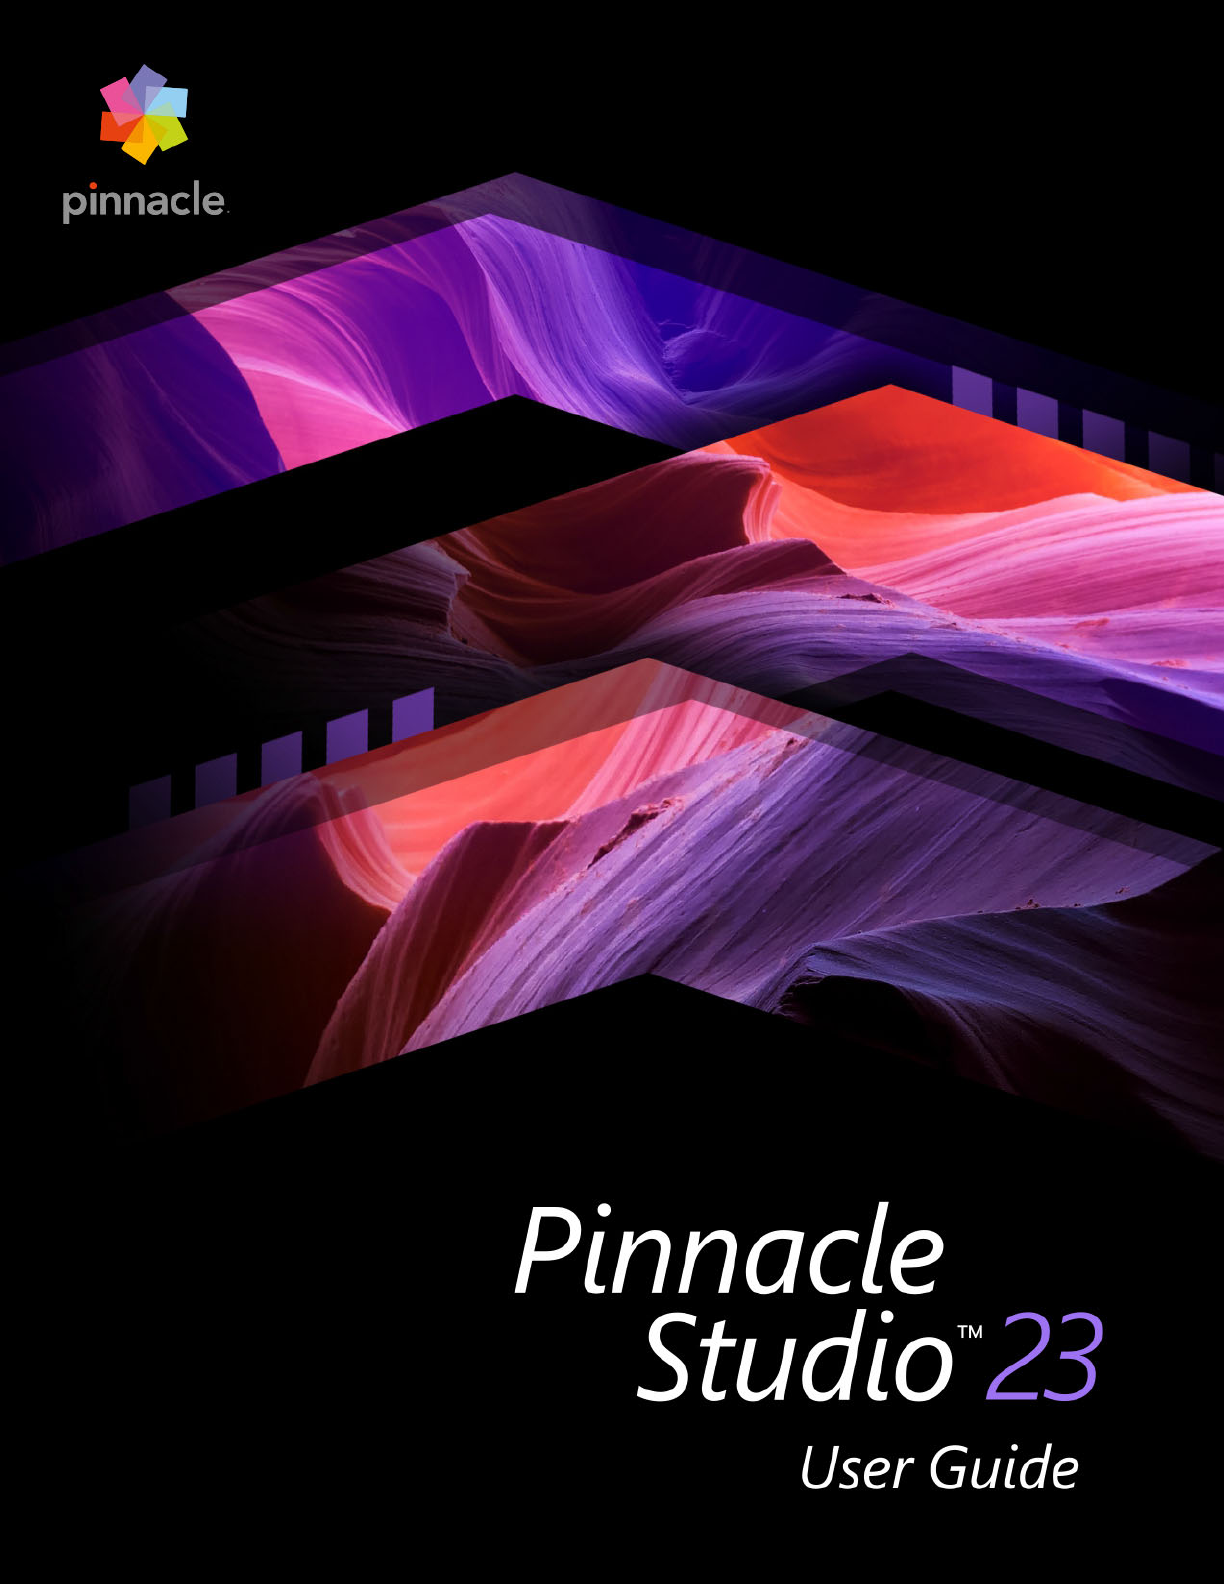 hardware requirements for pinnacle studio 23